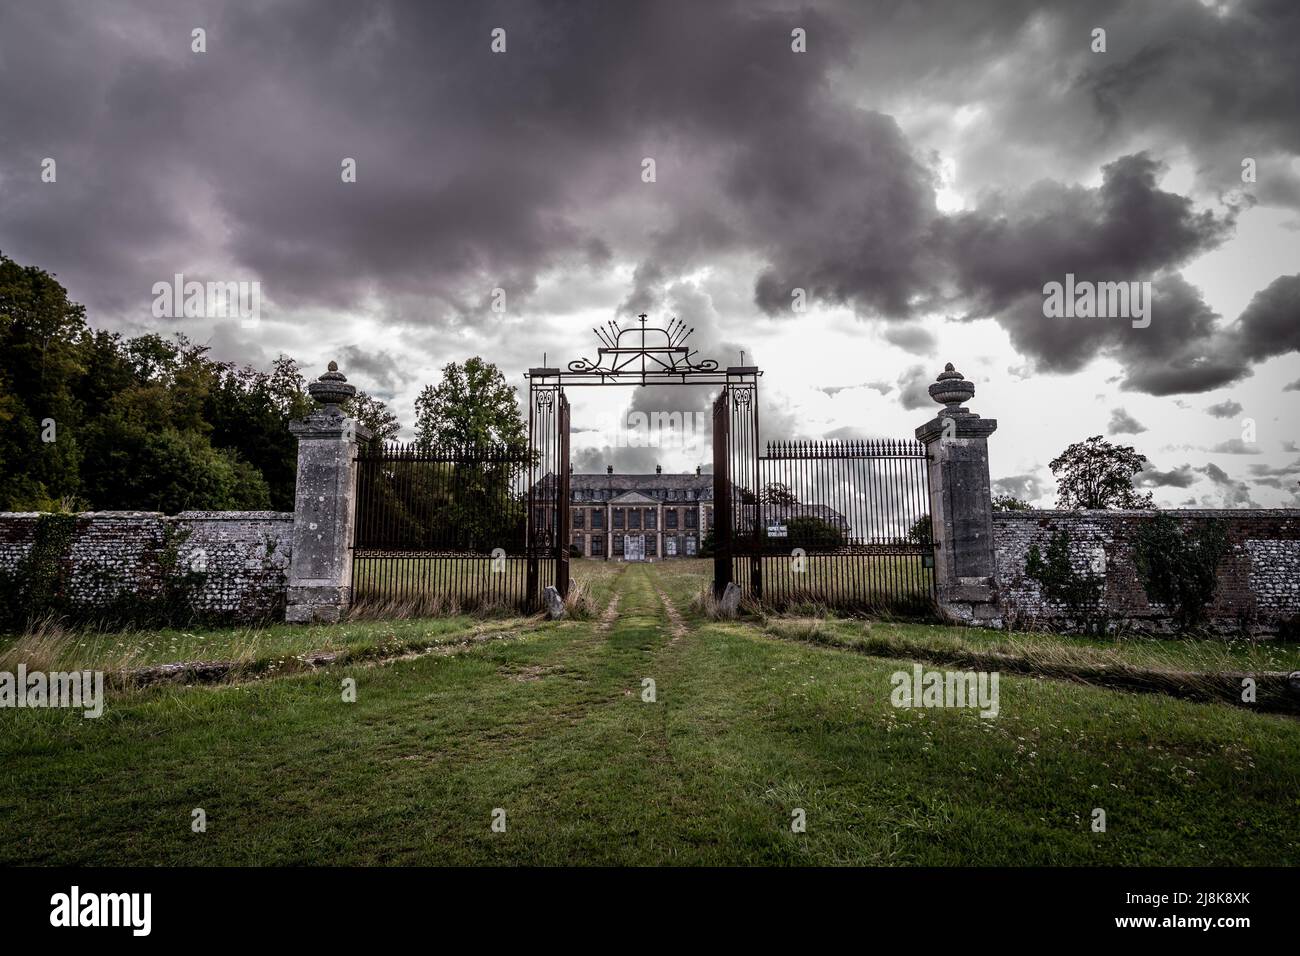 The old and rustic gates from an abandoned country house Stock Photo